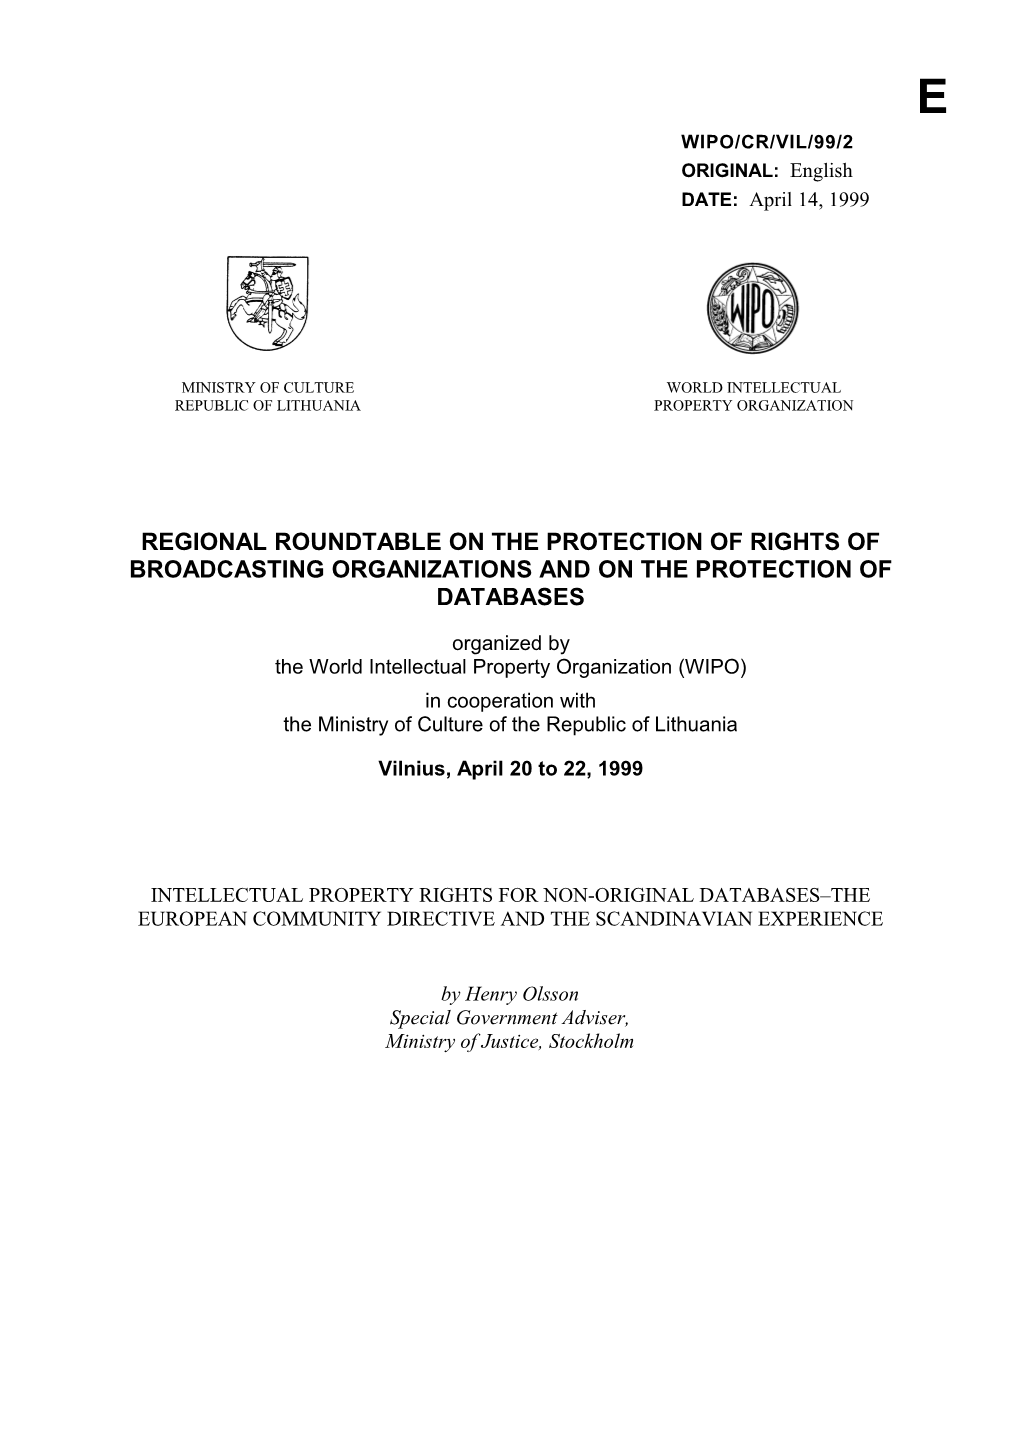 WIPO/CR/VIL/99/2: Intellectual Property Rights for Non-Original Databases - the European